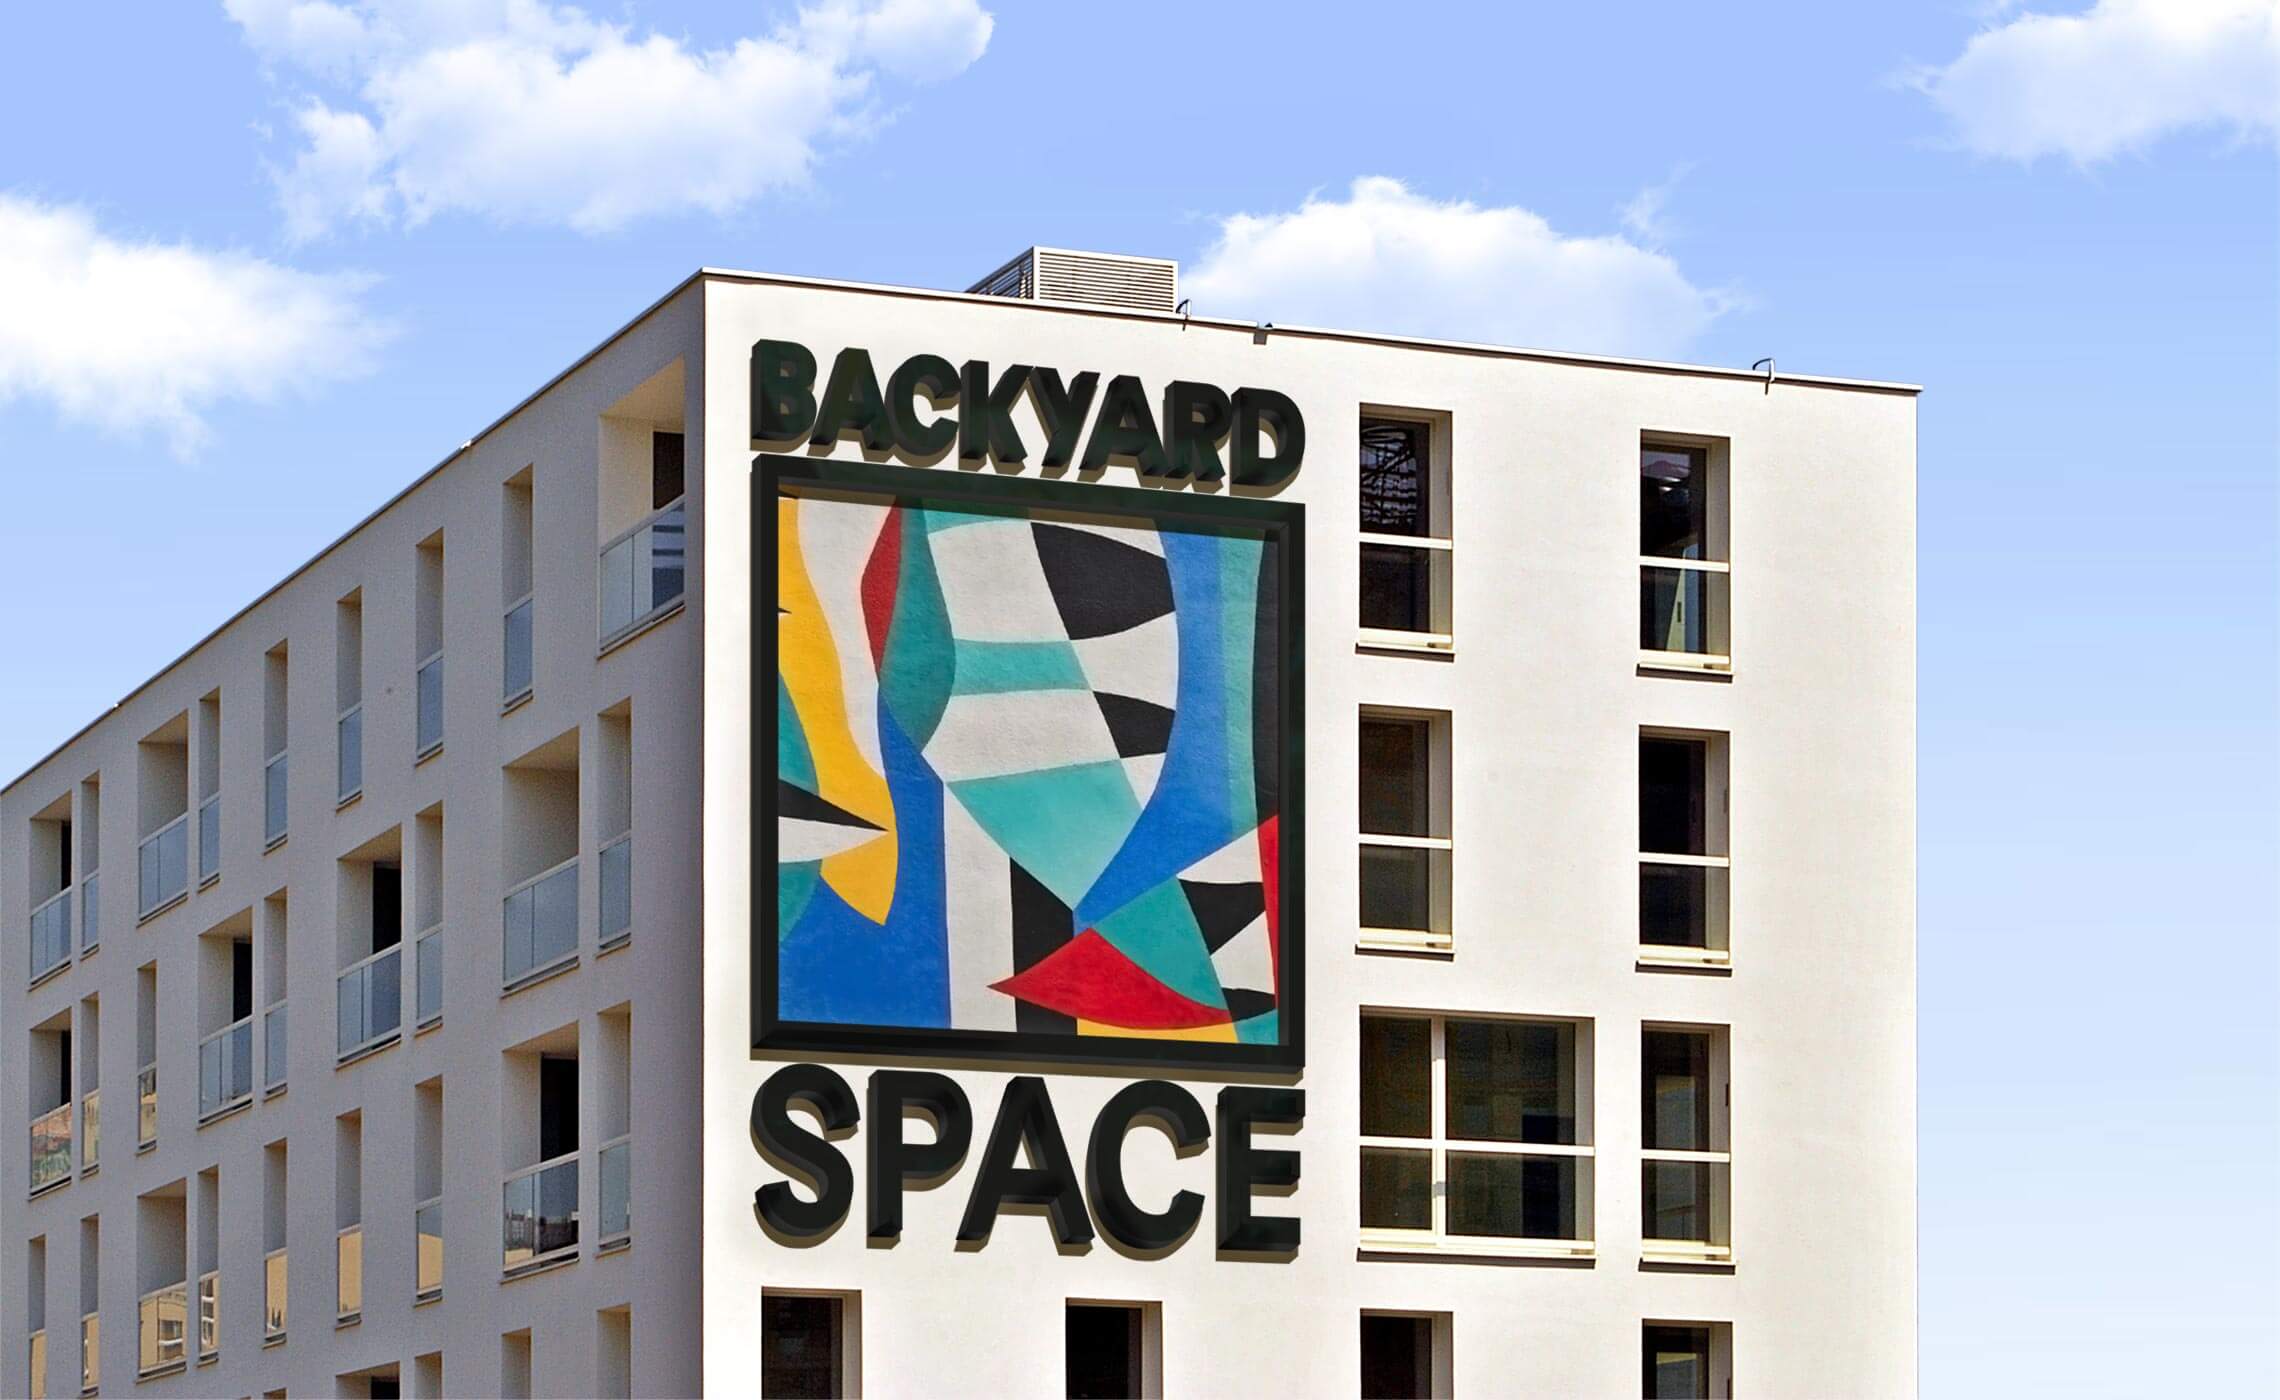 In this picture, the logo can be seen on the facade of the Backyard Space.